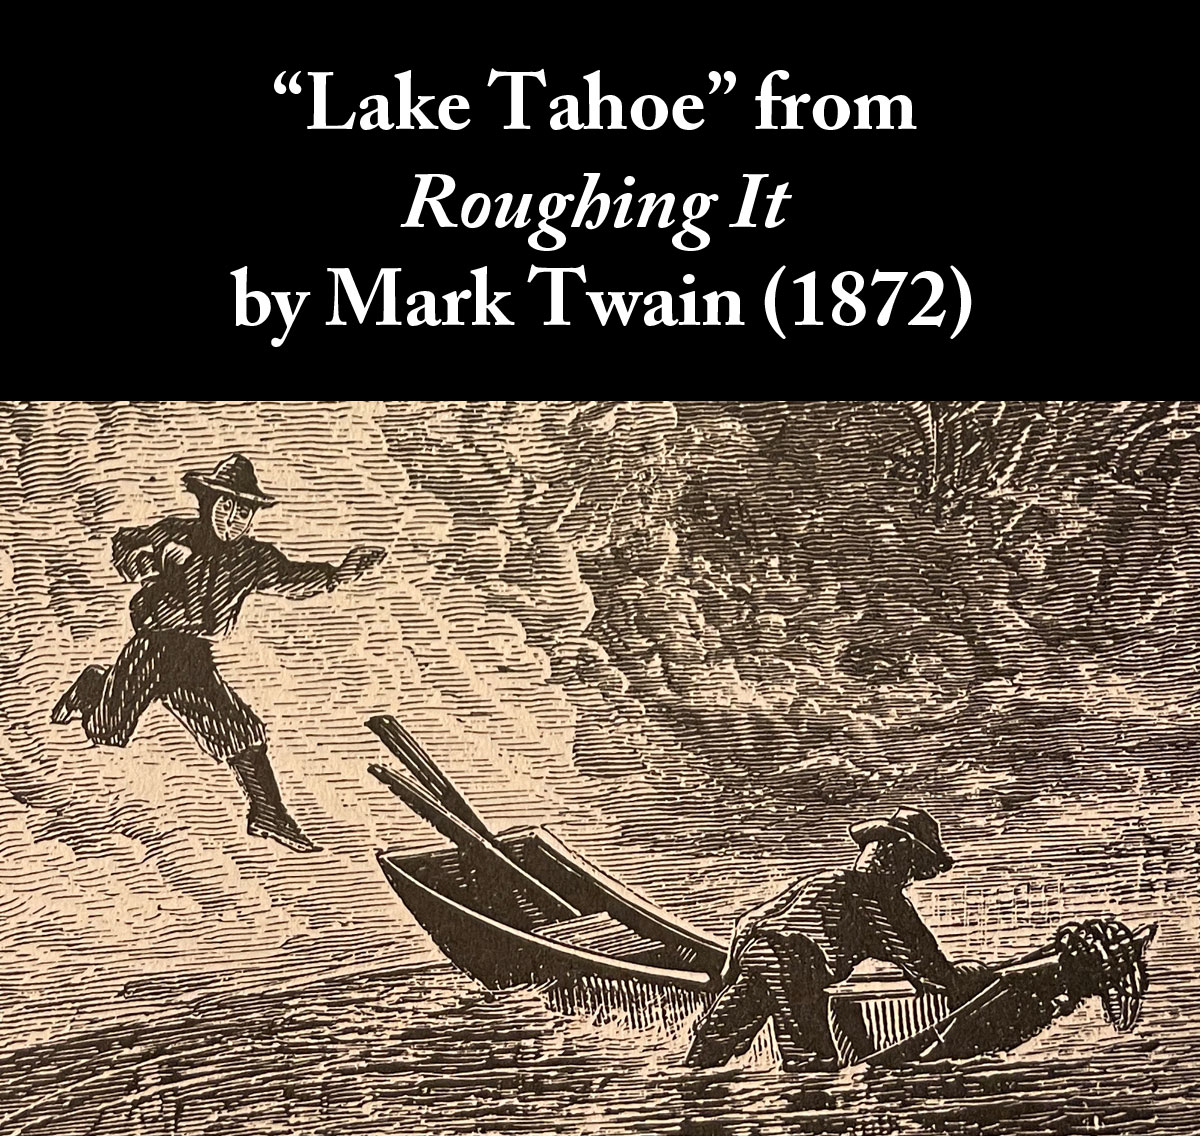 Lake Tahoe from Roughing It by Mark Twain (1872)